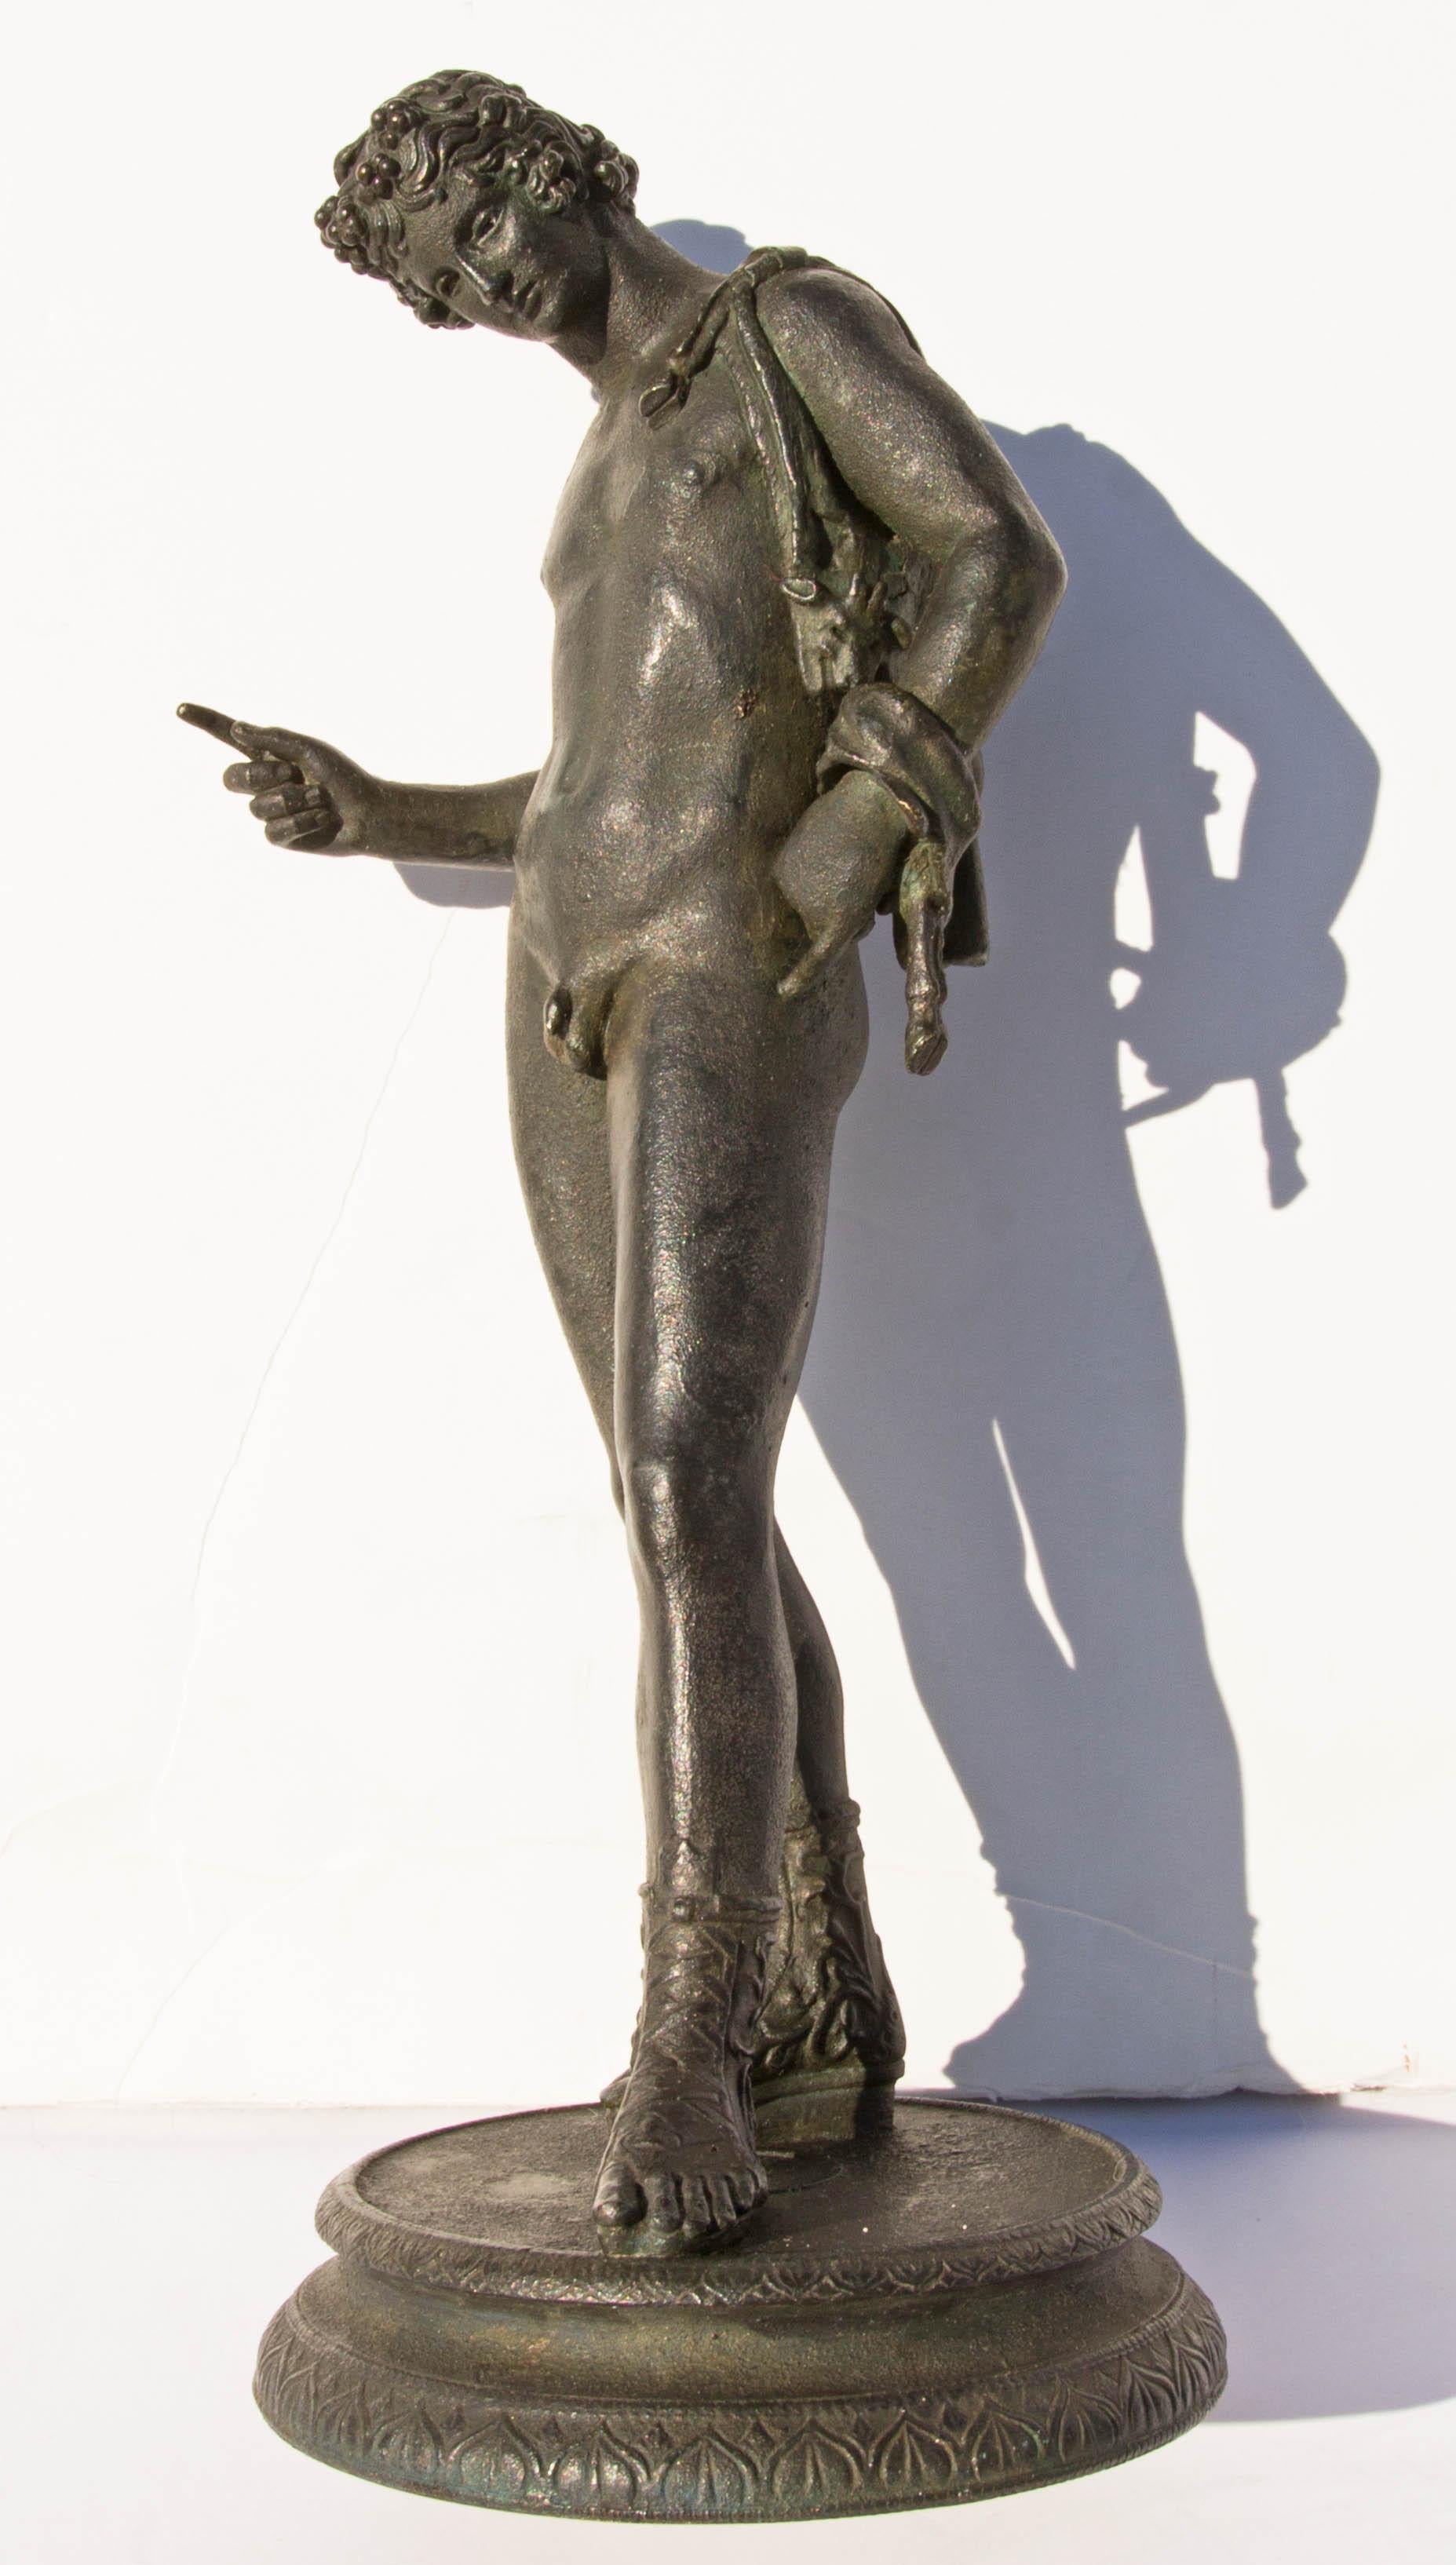 Grand Tour bronze sculpture of Narcissus after the original found in 1862 at Pompeii. When first found in Pompeii it was identified as Narcissus. Years later it was identified as Dionysus, 19th century.